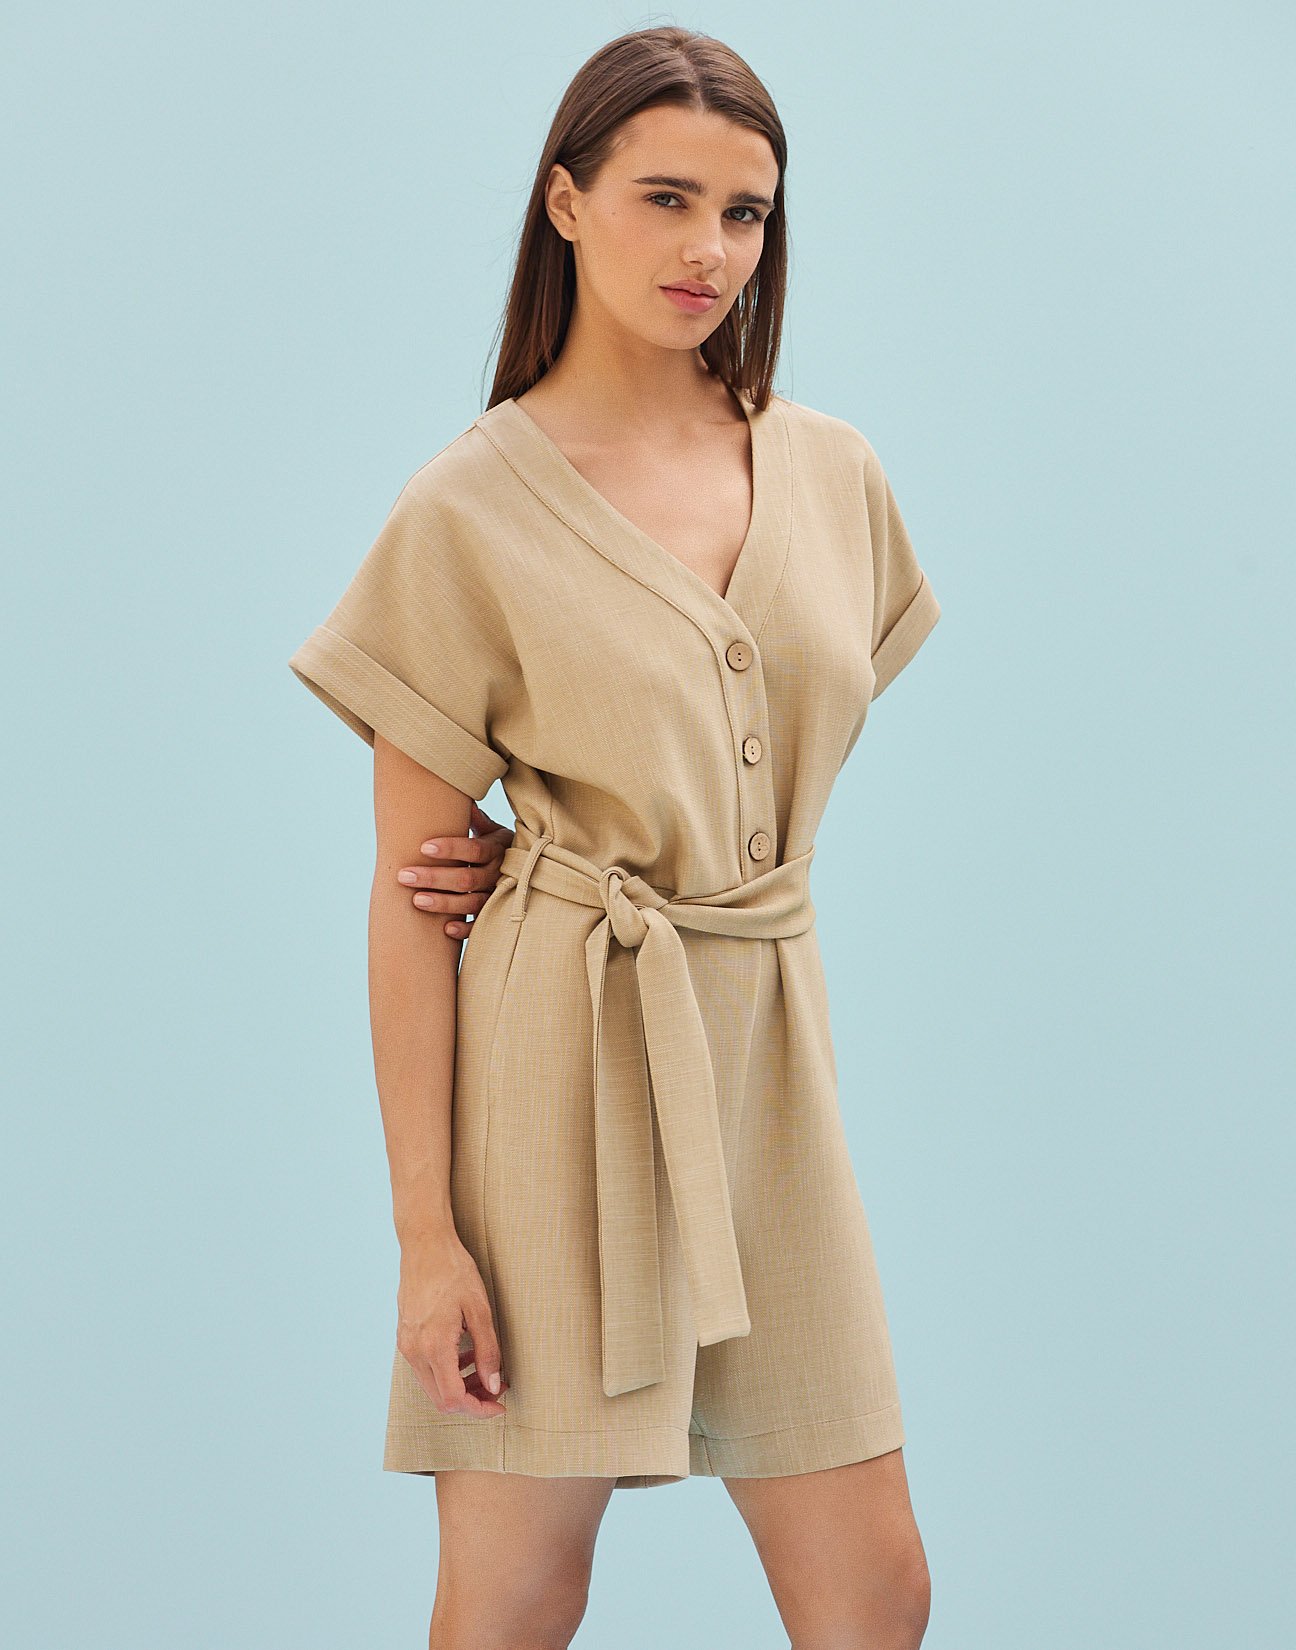 Playsuit with belt